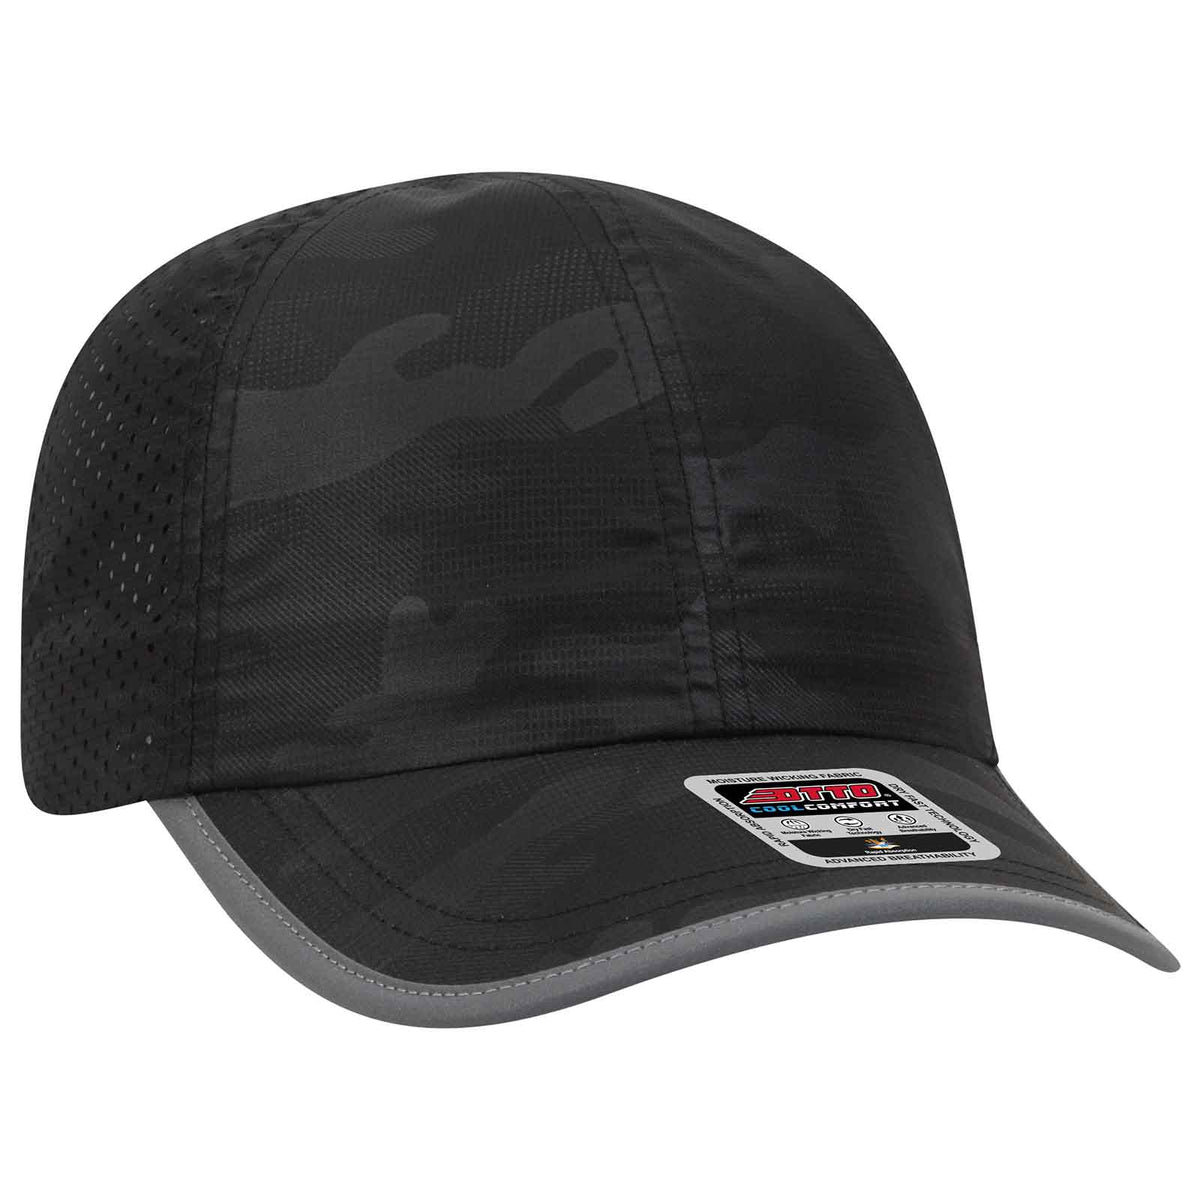 OTTO 133-1258 6 Panel Textured Polyester Pongee with Mesh Inserts Reflective Sandwich Visor Running Cap - Black Camo - HIT a Double - 1